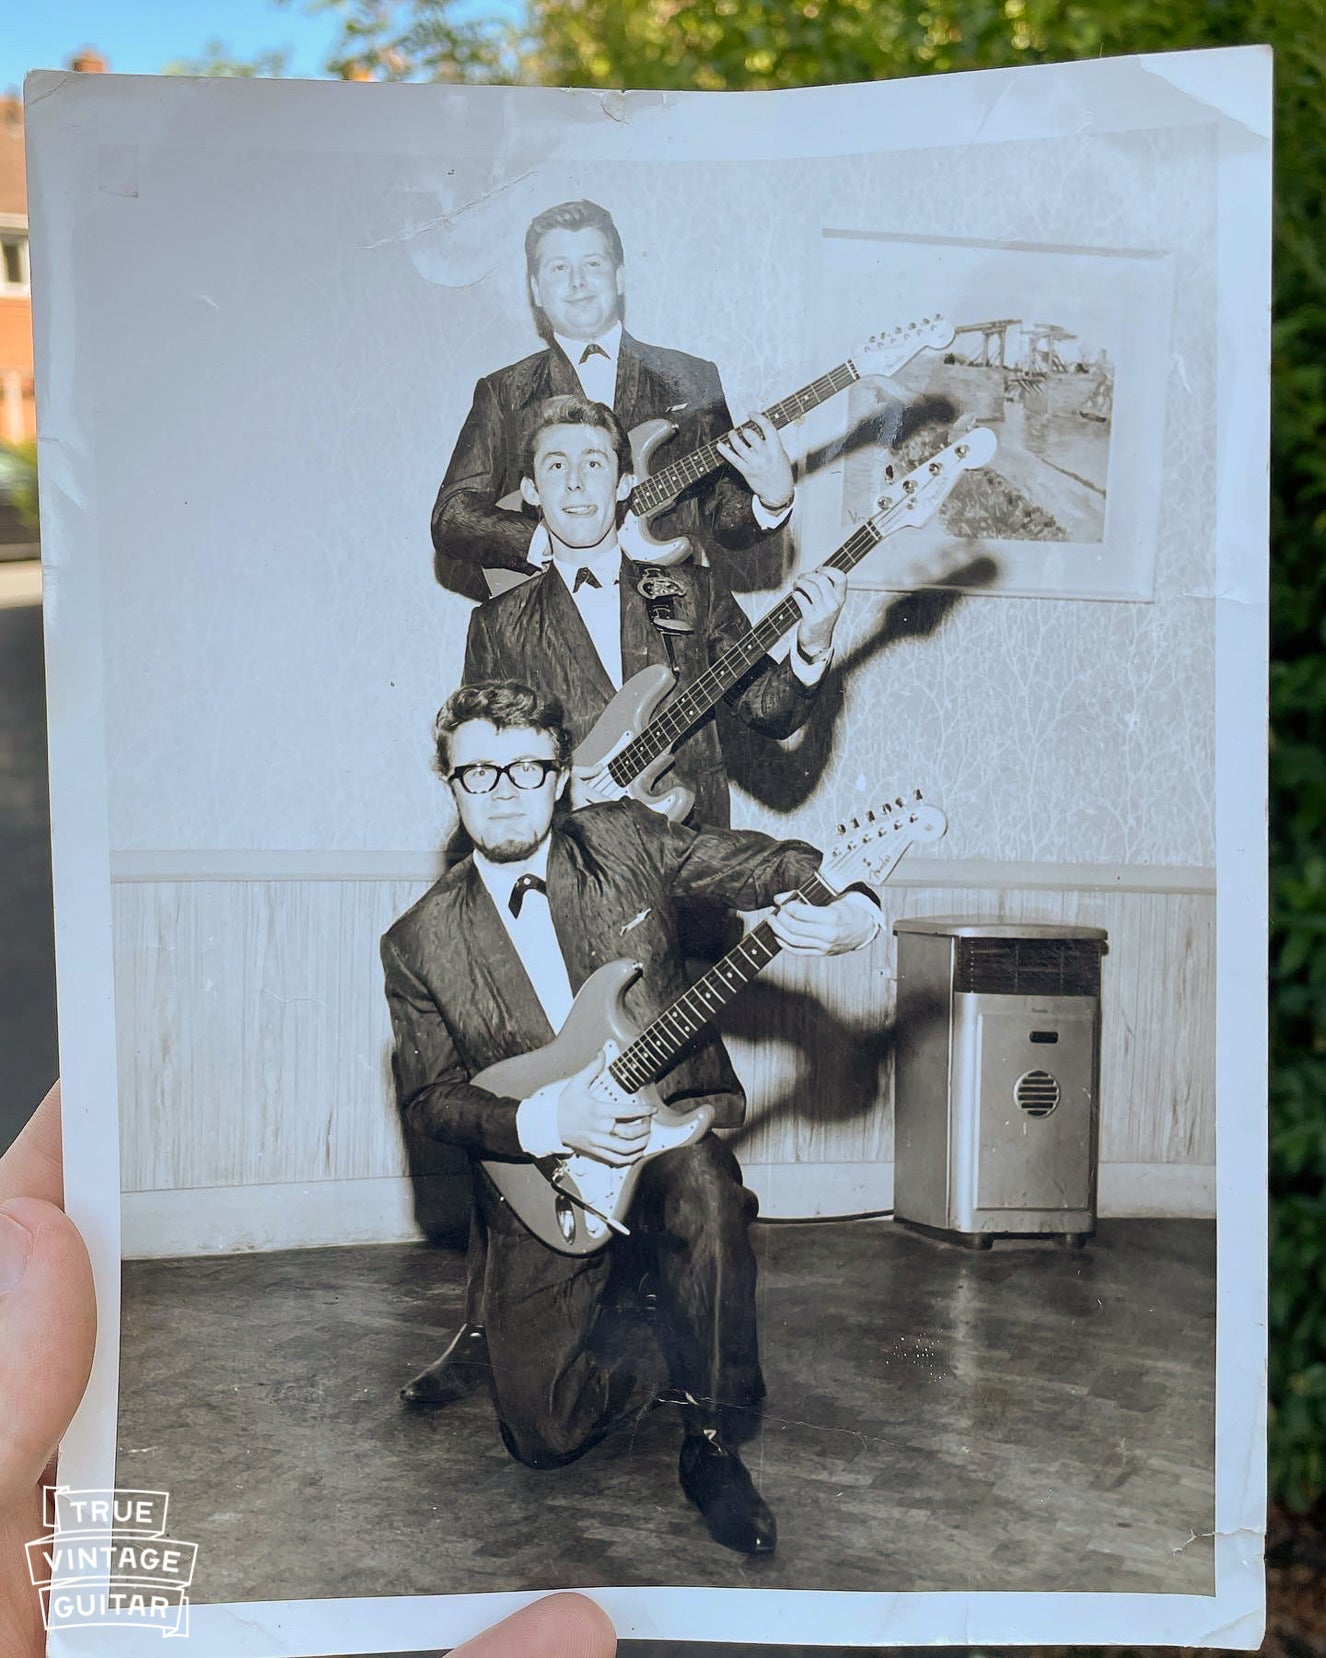 Photo of London, UK based band The Strollers with matching 1962 Fender Stratocasters and Precision Bass guitars